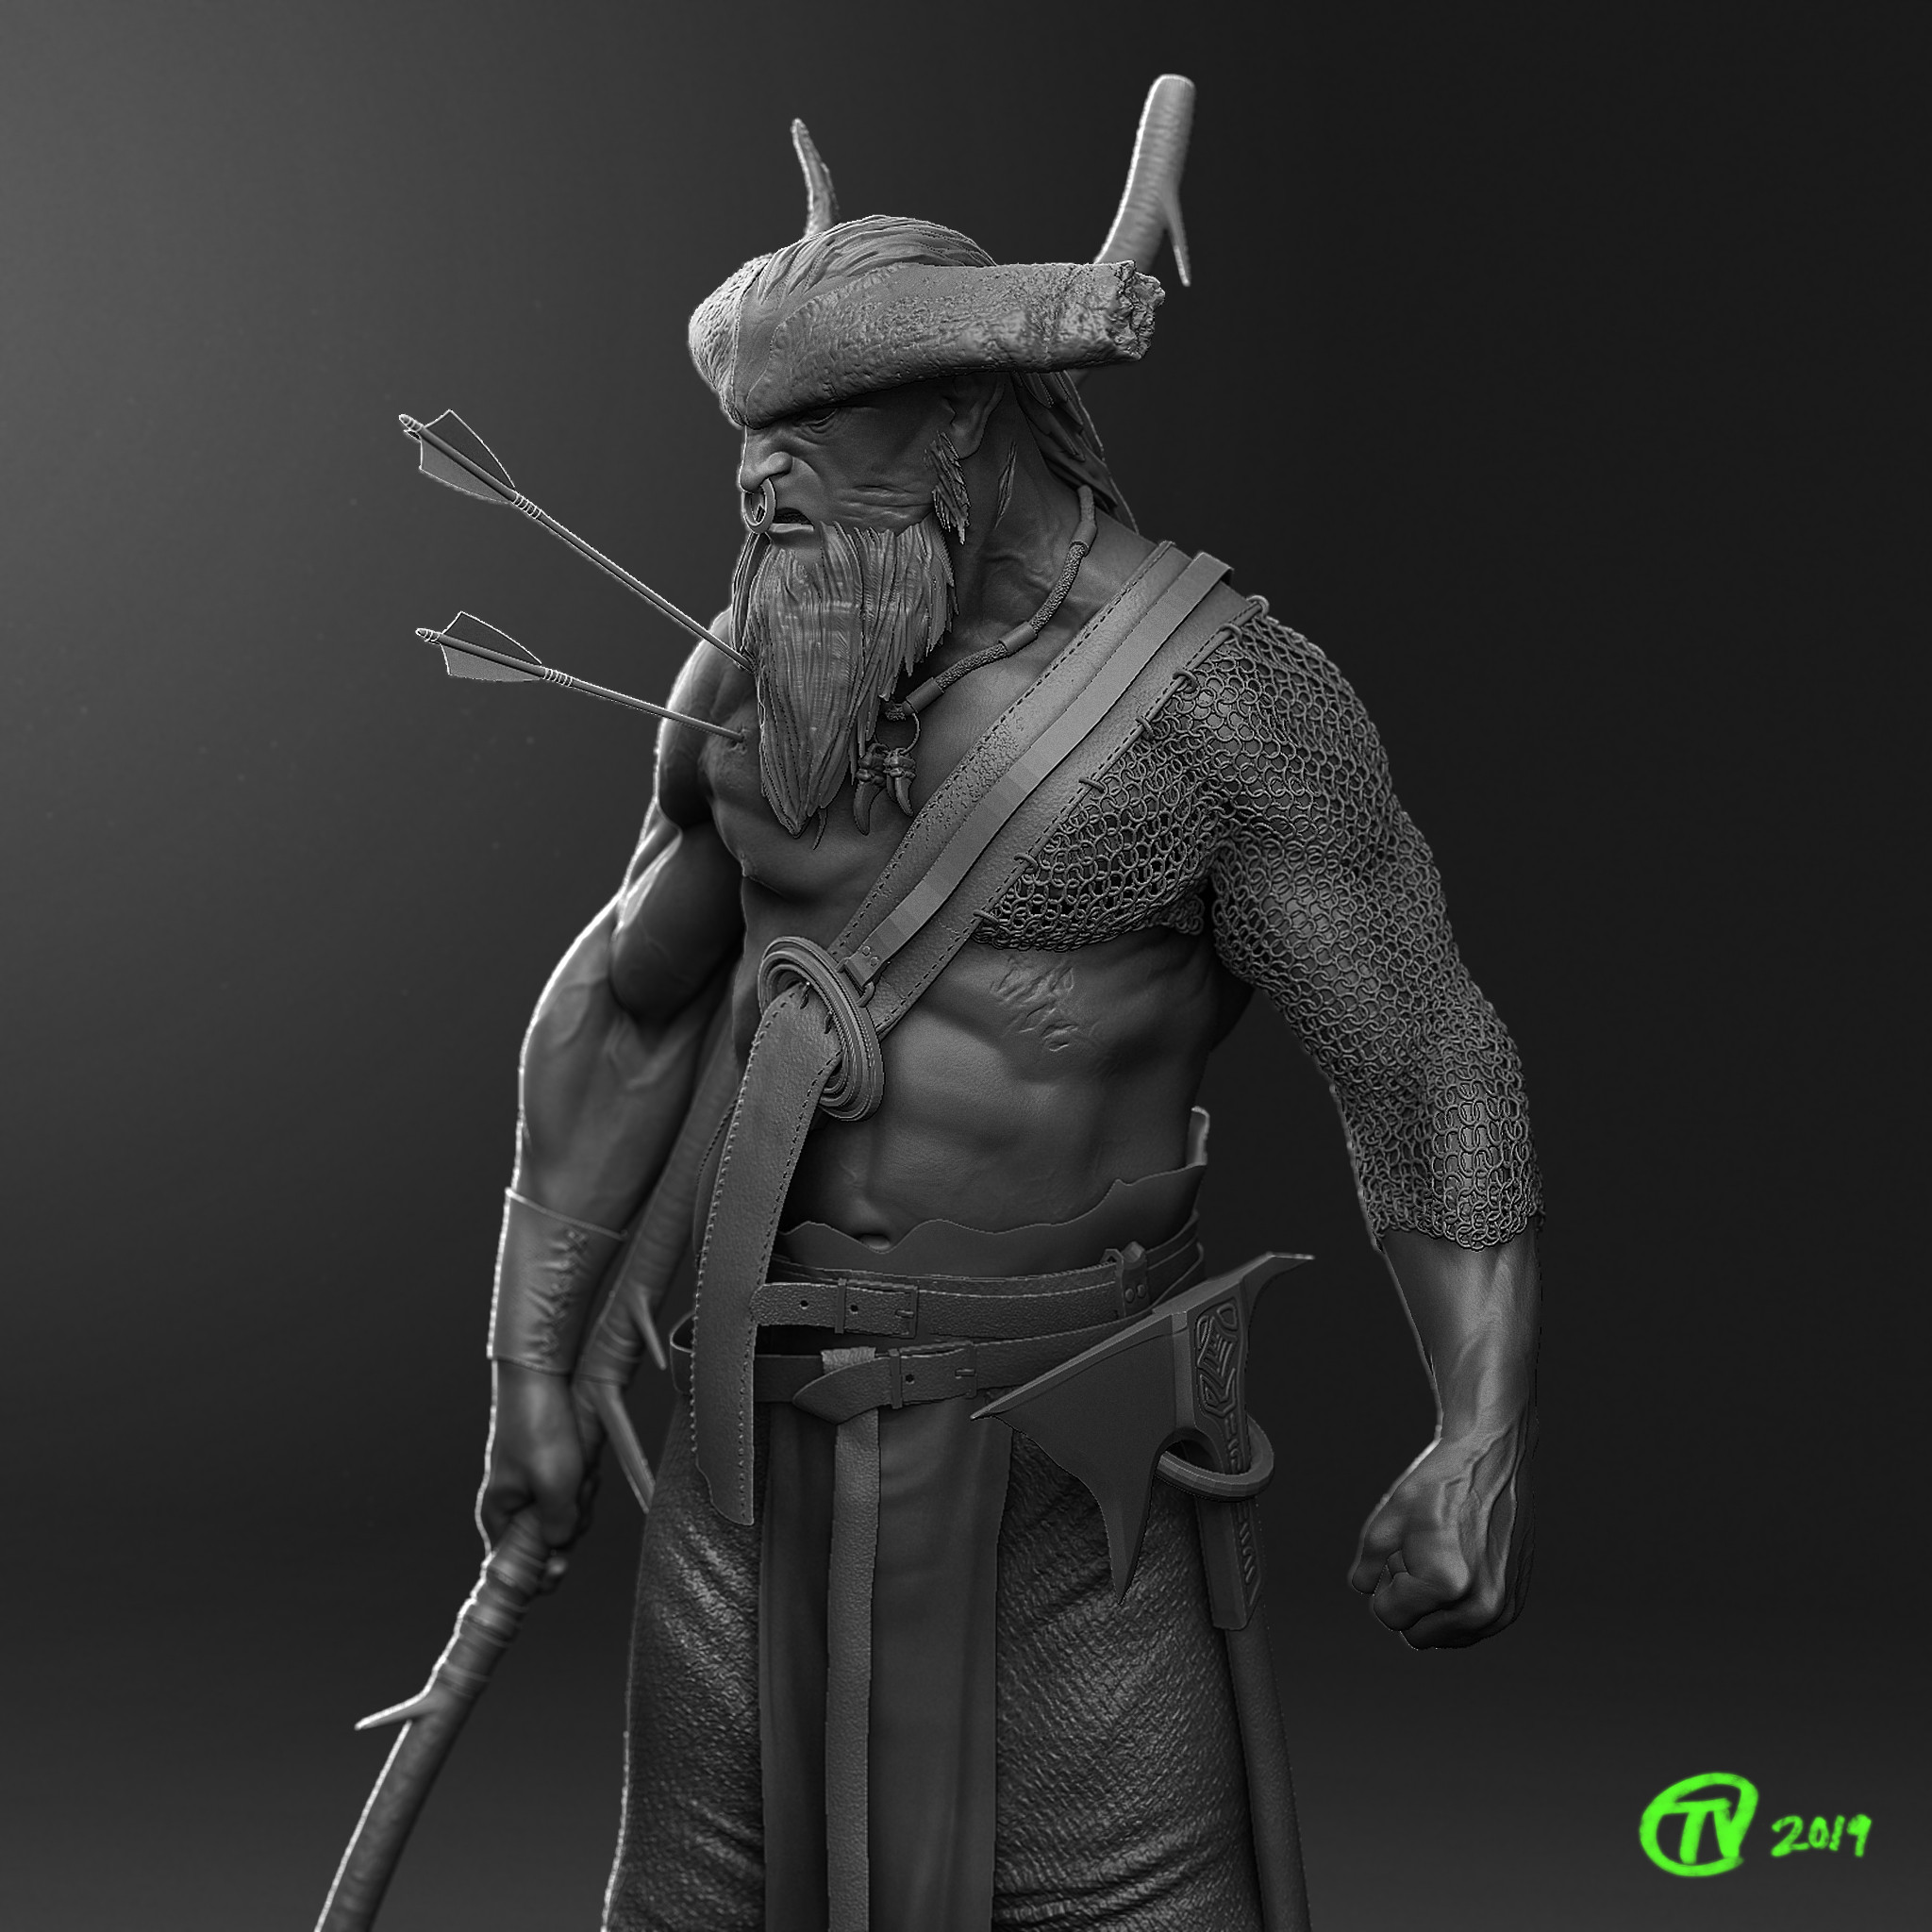 First Round sculpt and render